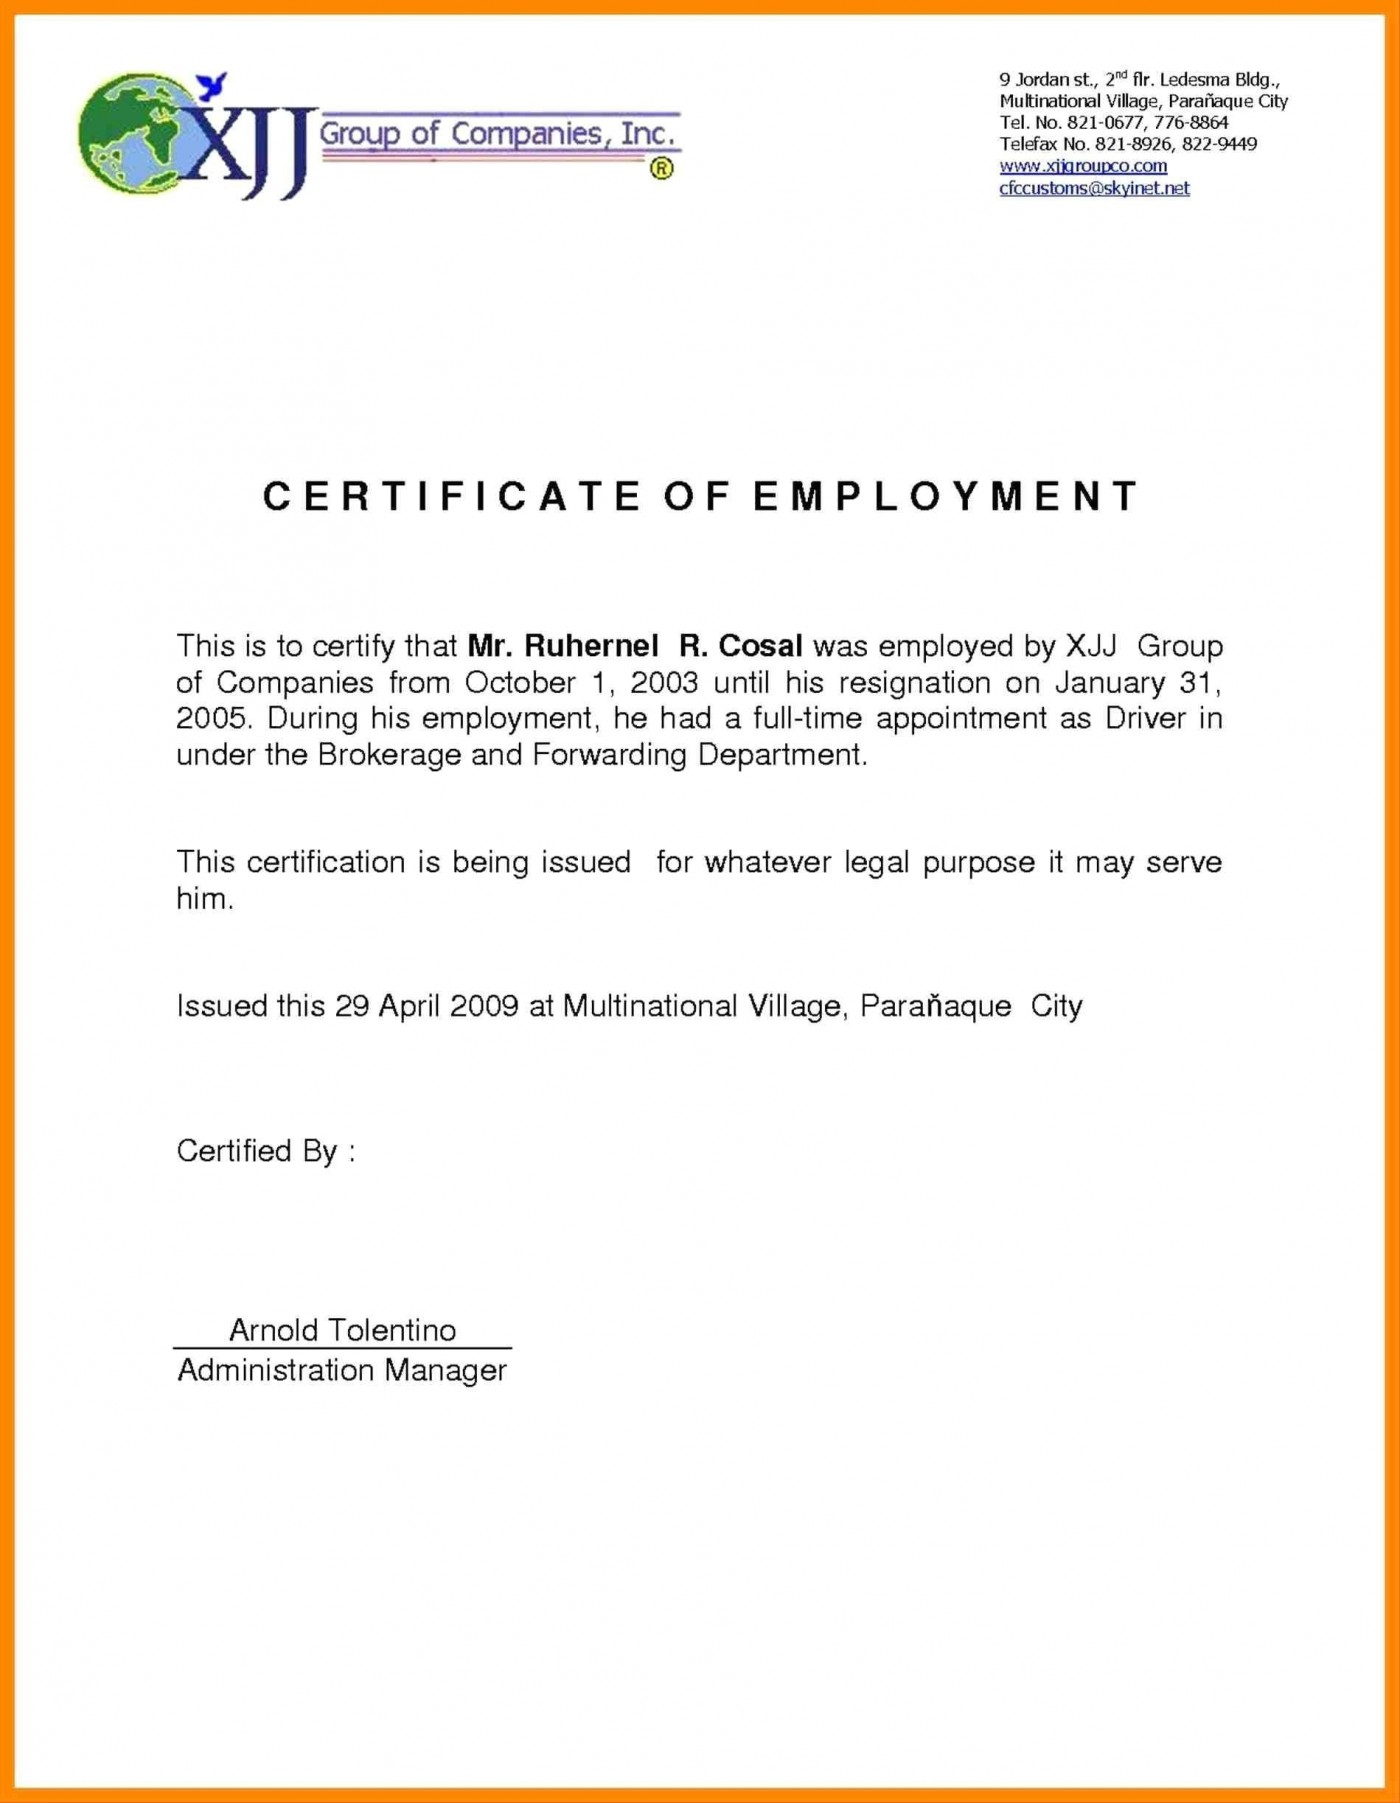 010 Certification Employment Letter Sample Job Letteres Pertaining To Template Of Certificate Of Employment